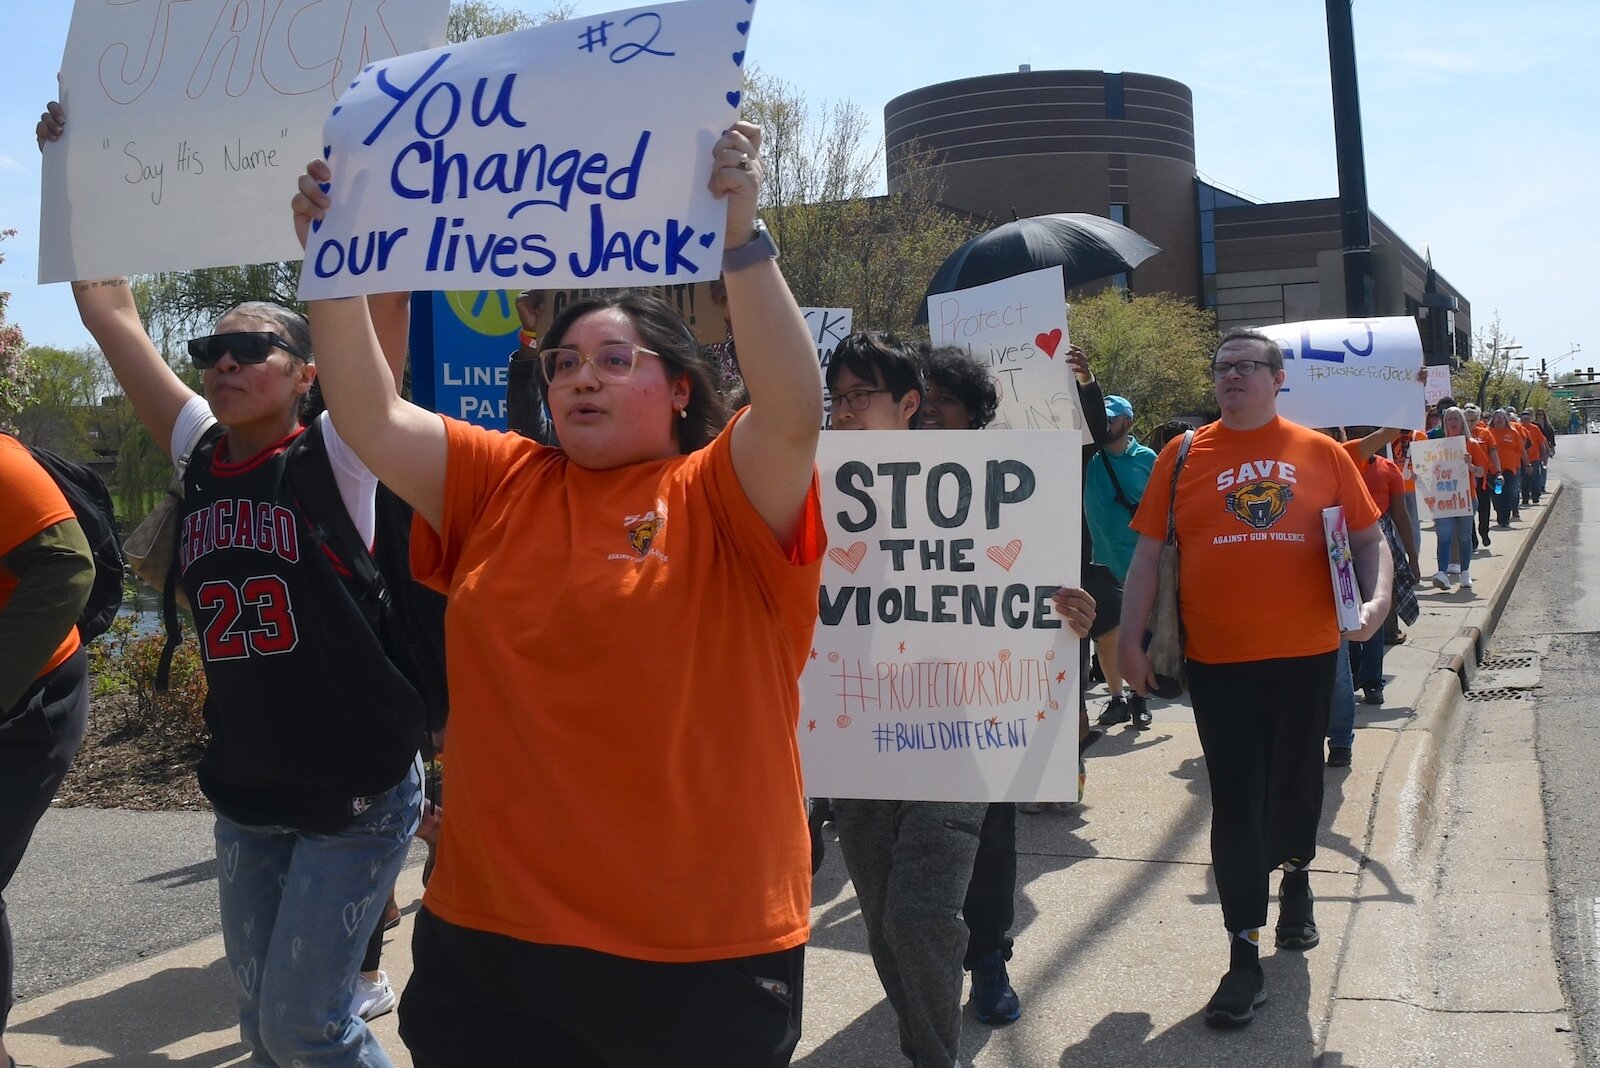 Scenes from the anti-gun violence march in downtown Battle Creek.